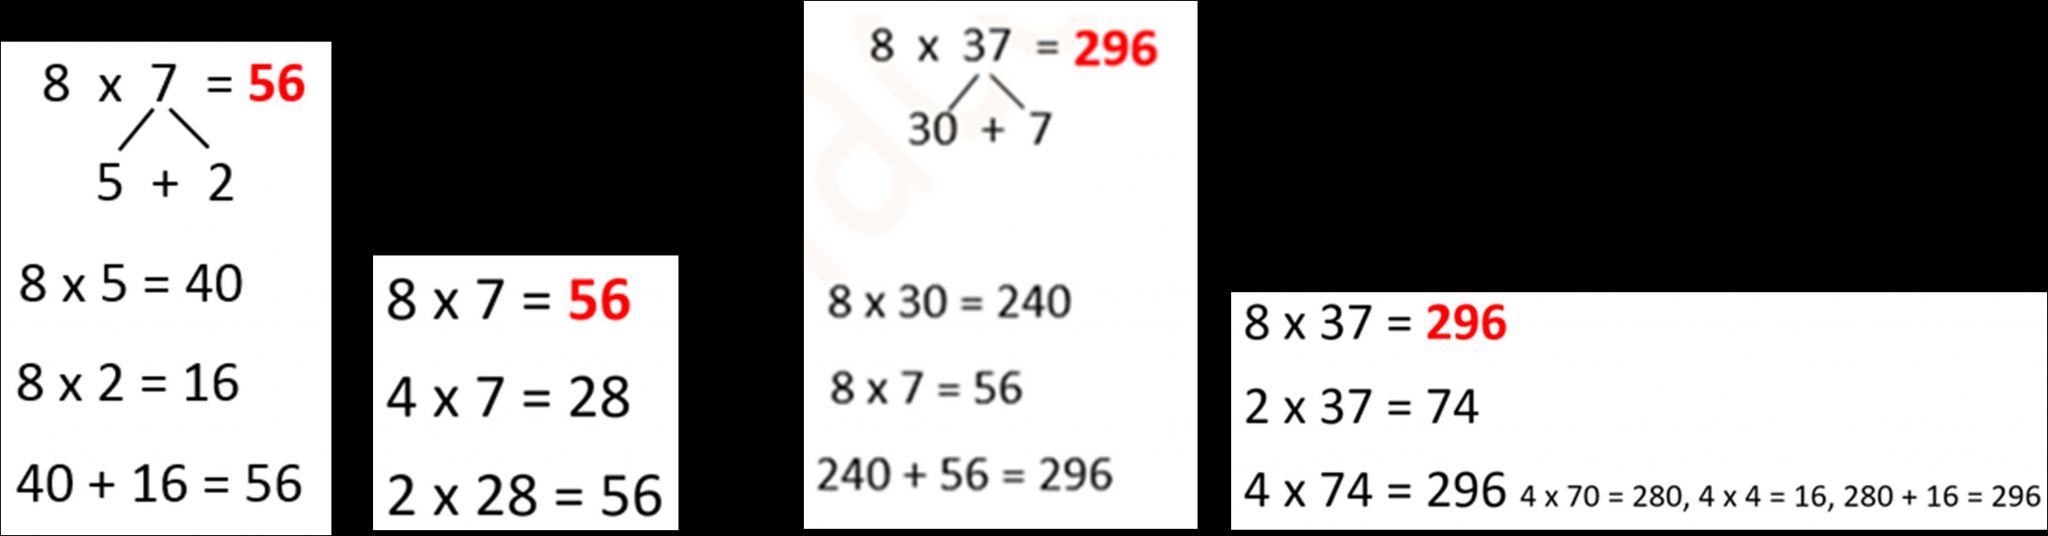 Factoring Distributive Property Worksheet Answers together with Primary Maths